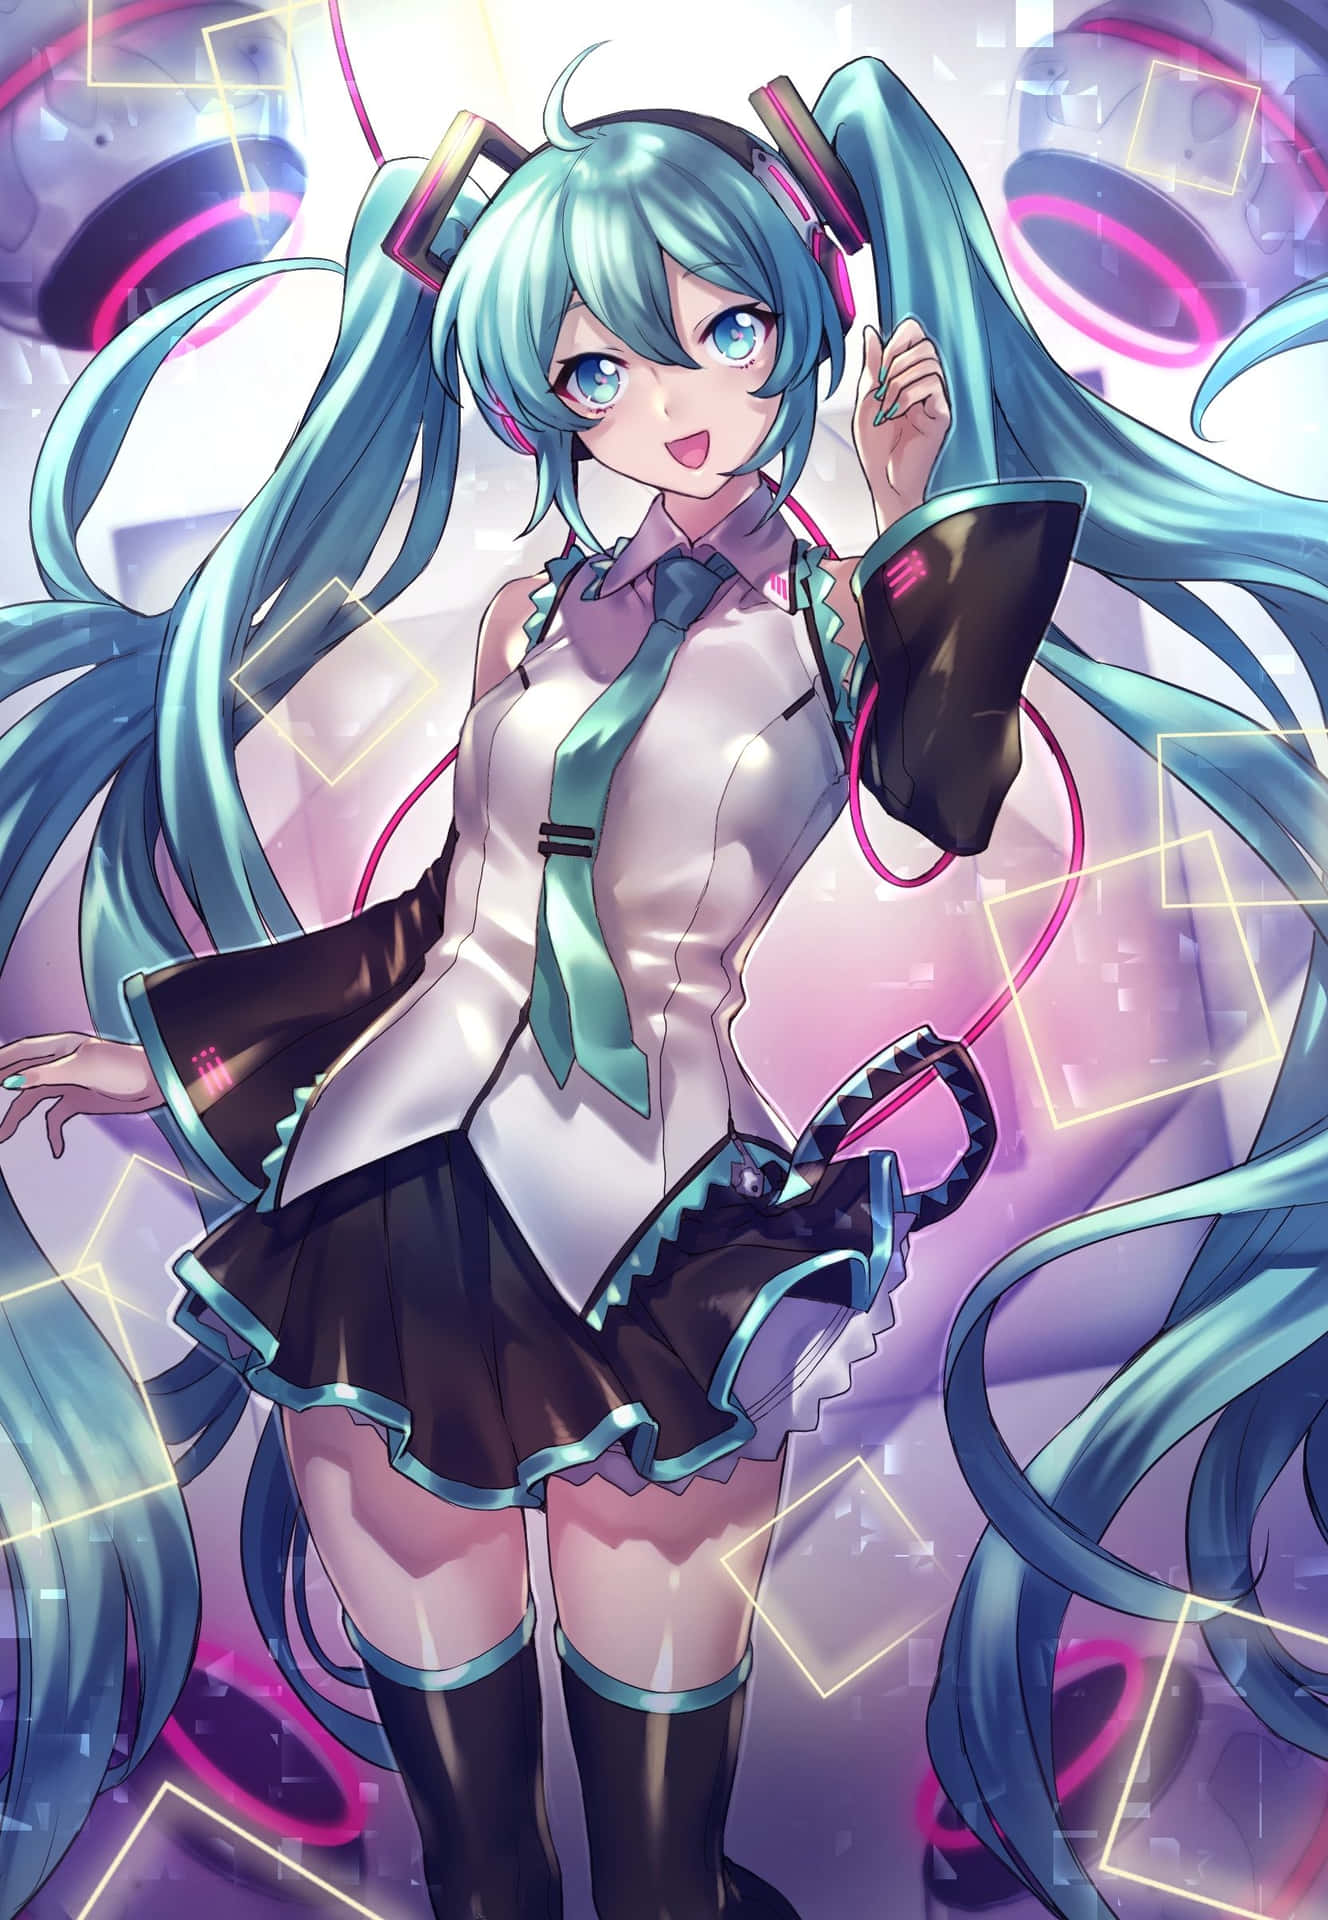 Get ready to dive into the Vocaloid world with one of Hatsune Miku's signature phones Wallpaper